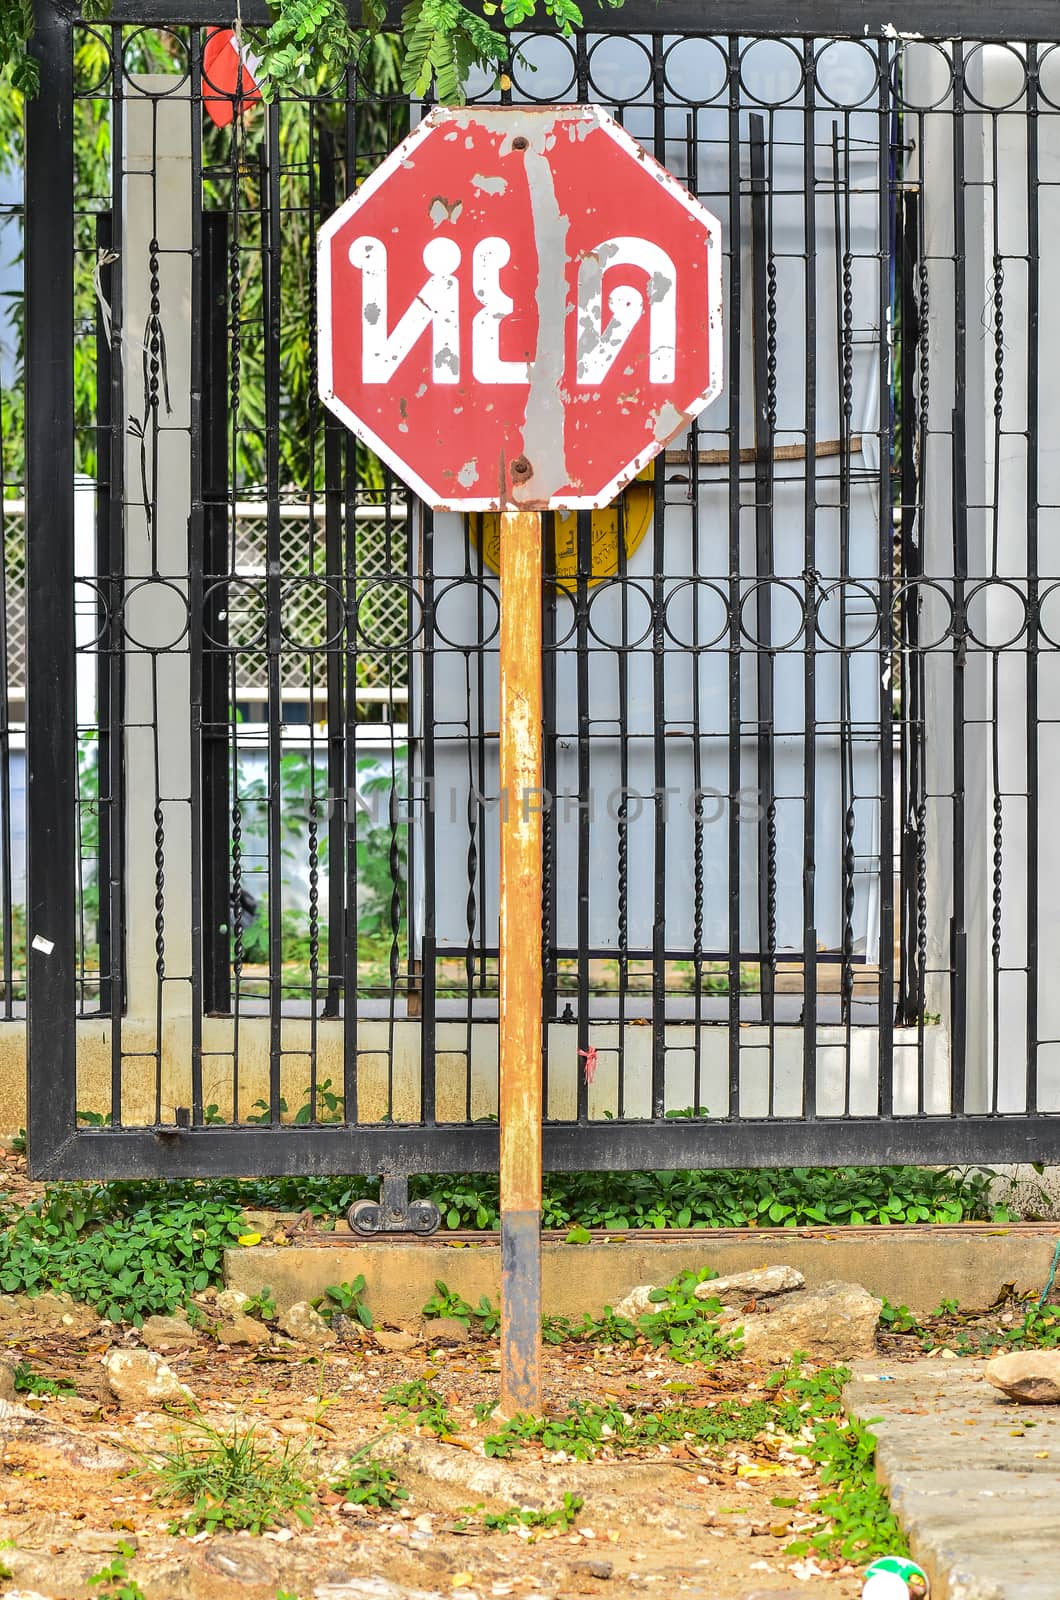 Traffic Signs by raweenuttapong